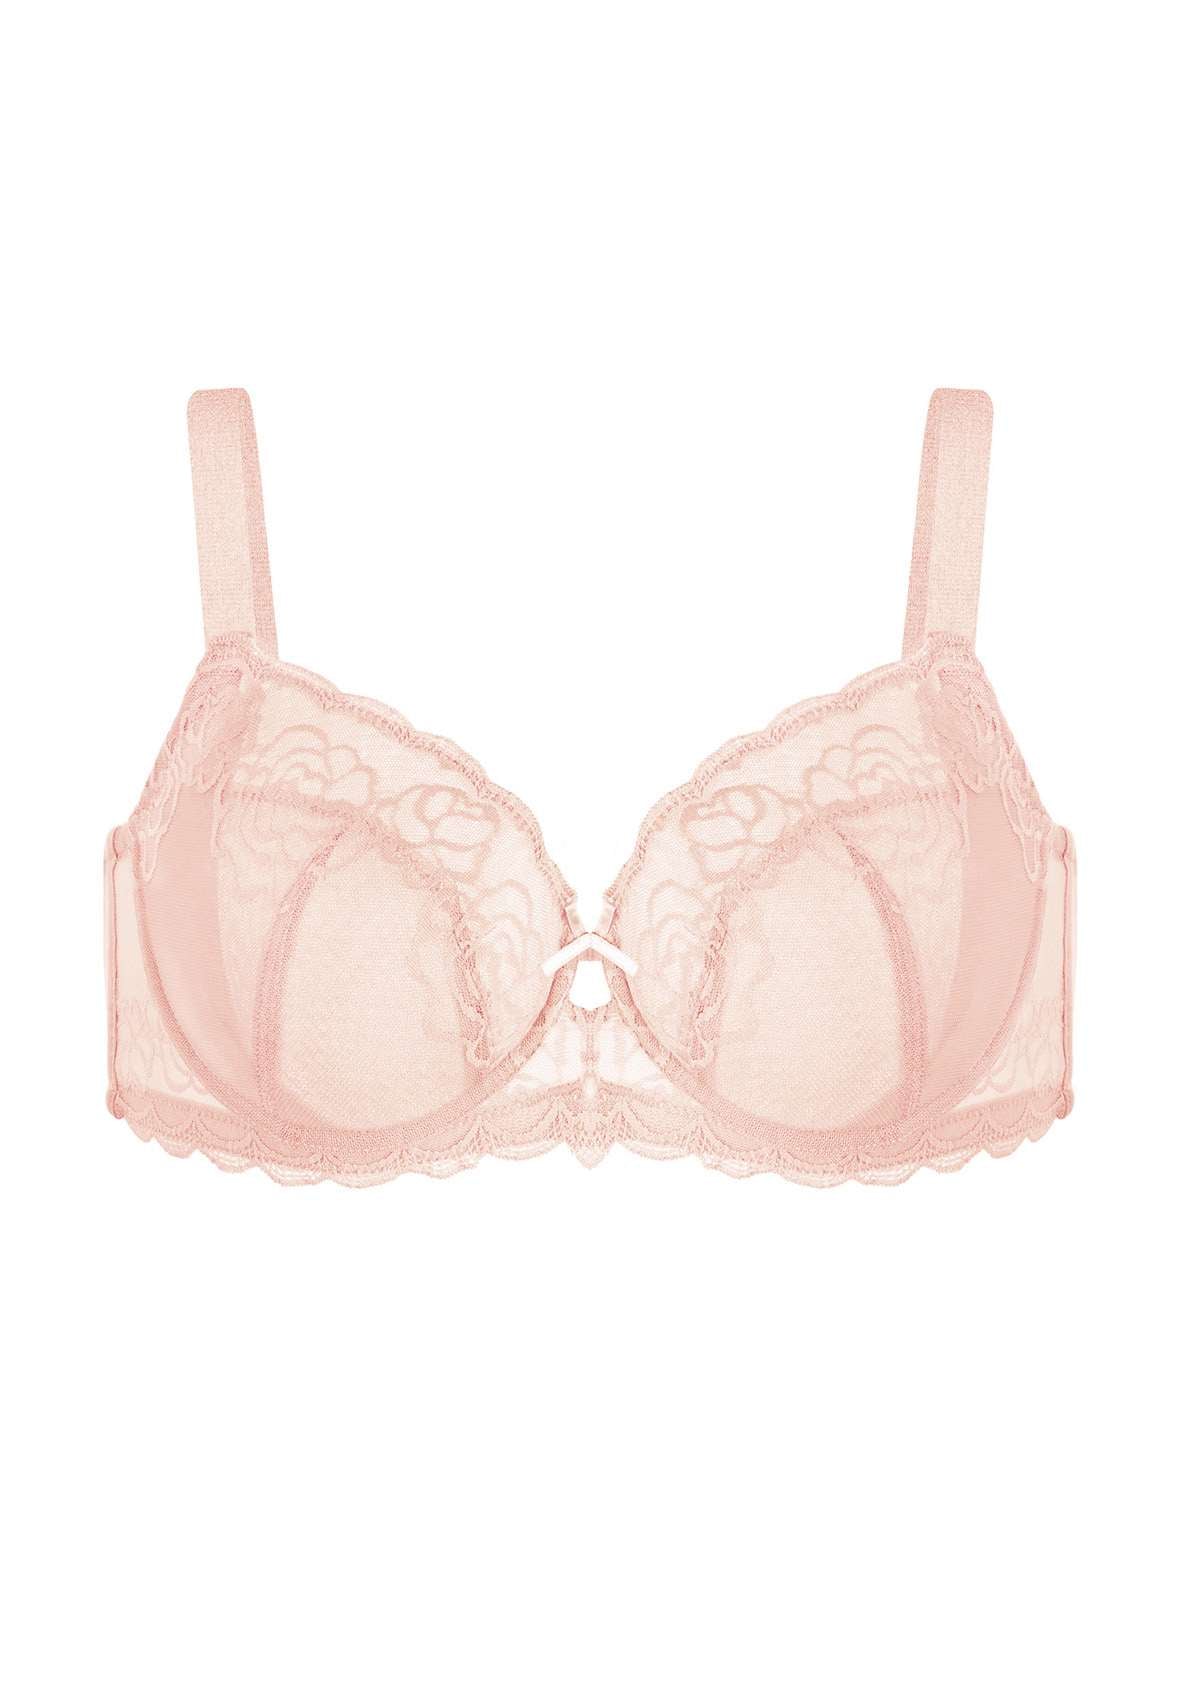 Bali Bra 44C Pink Lace Padded Underwire Adjustable Clasp Back – CA.DI.ME.